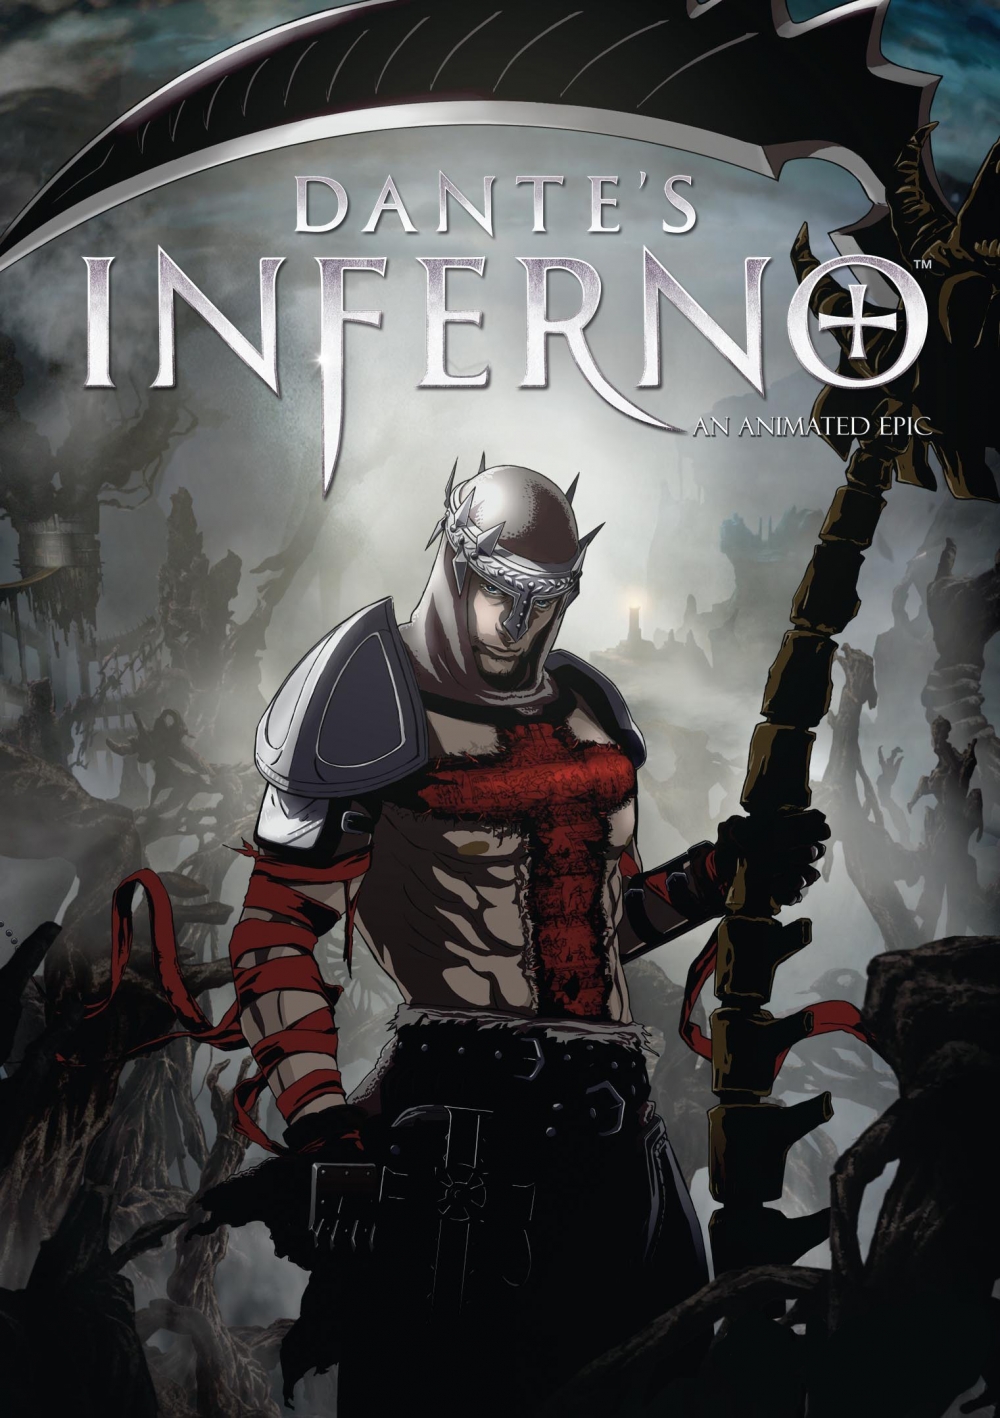  :   - (Dante's Inferno: An Animated Epic)